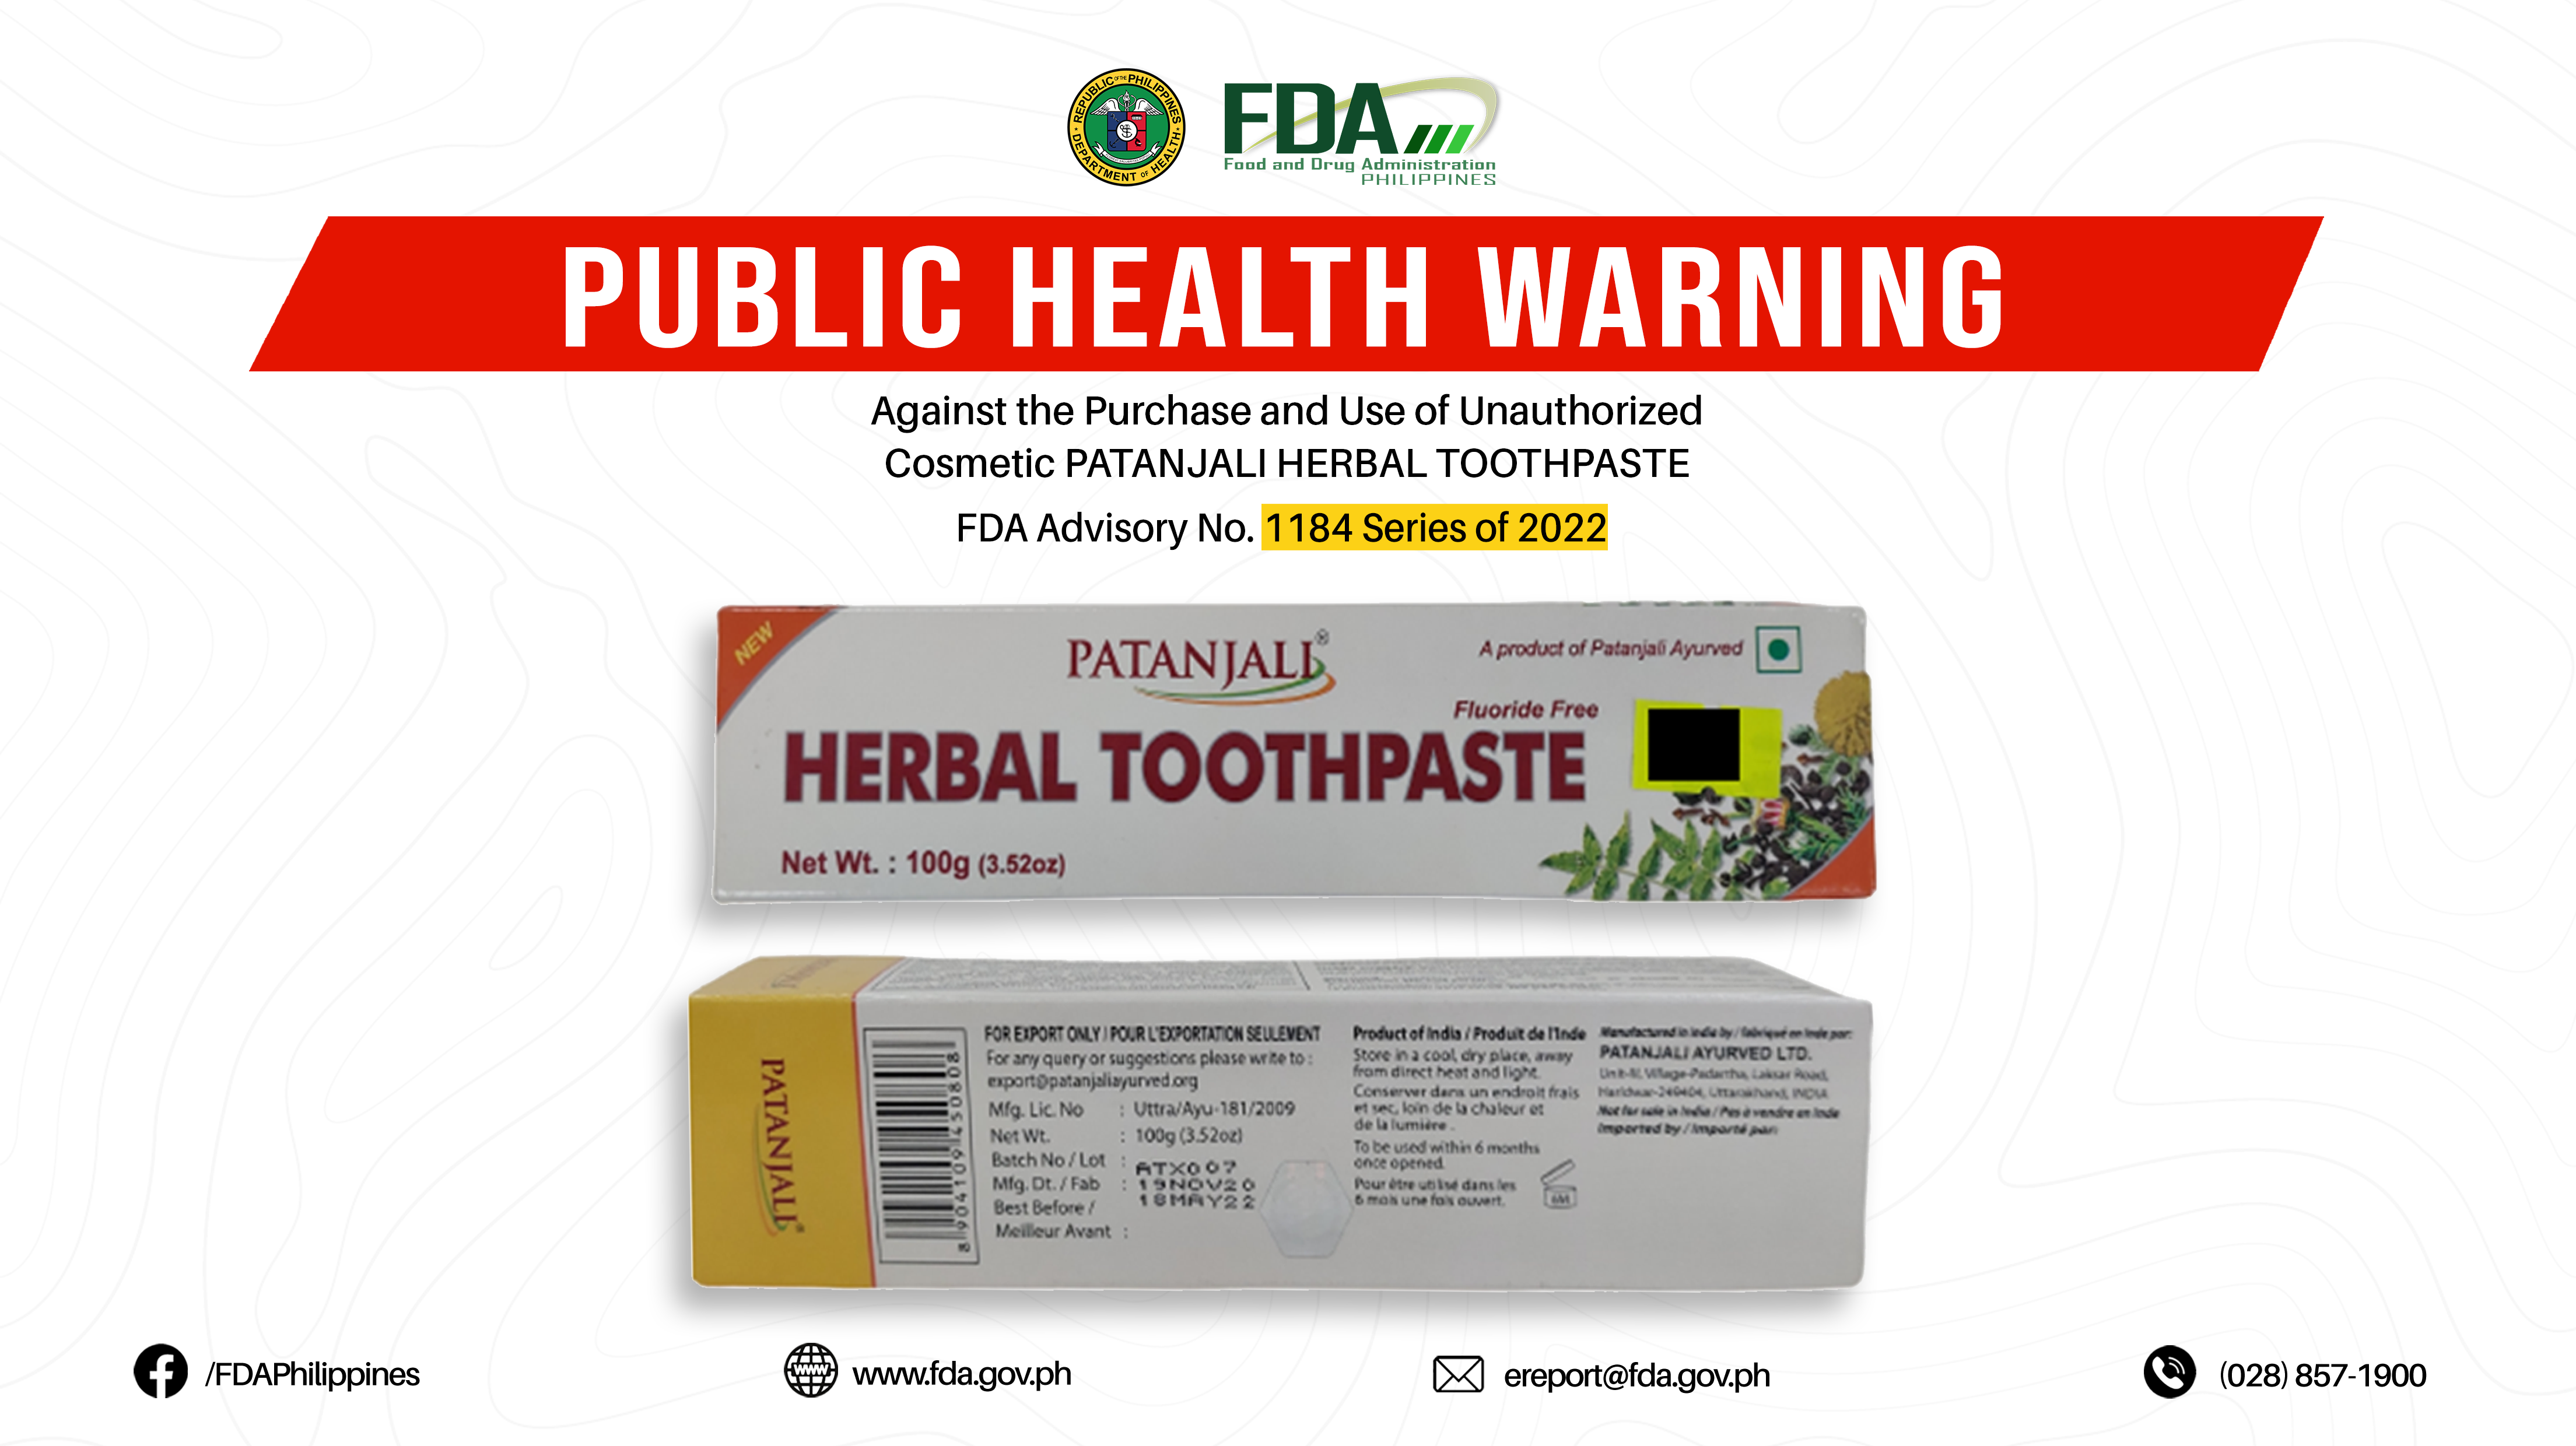 FDA Advisory No.2022-1184 || Public Health Warning Against the Purchase and Use of Unauthorized Cosmetic PATANJALI HERBAL TOOTHPASTE